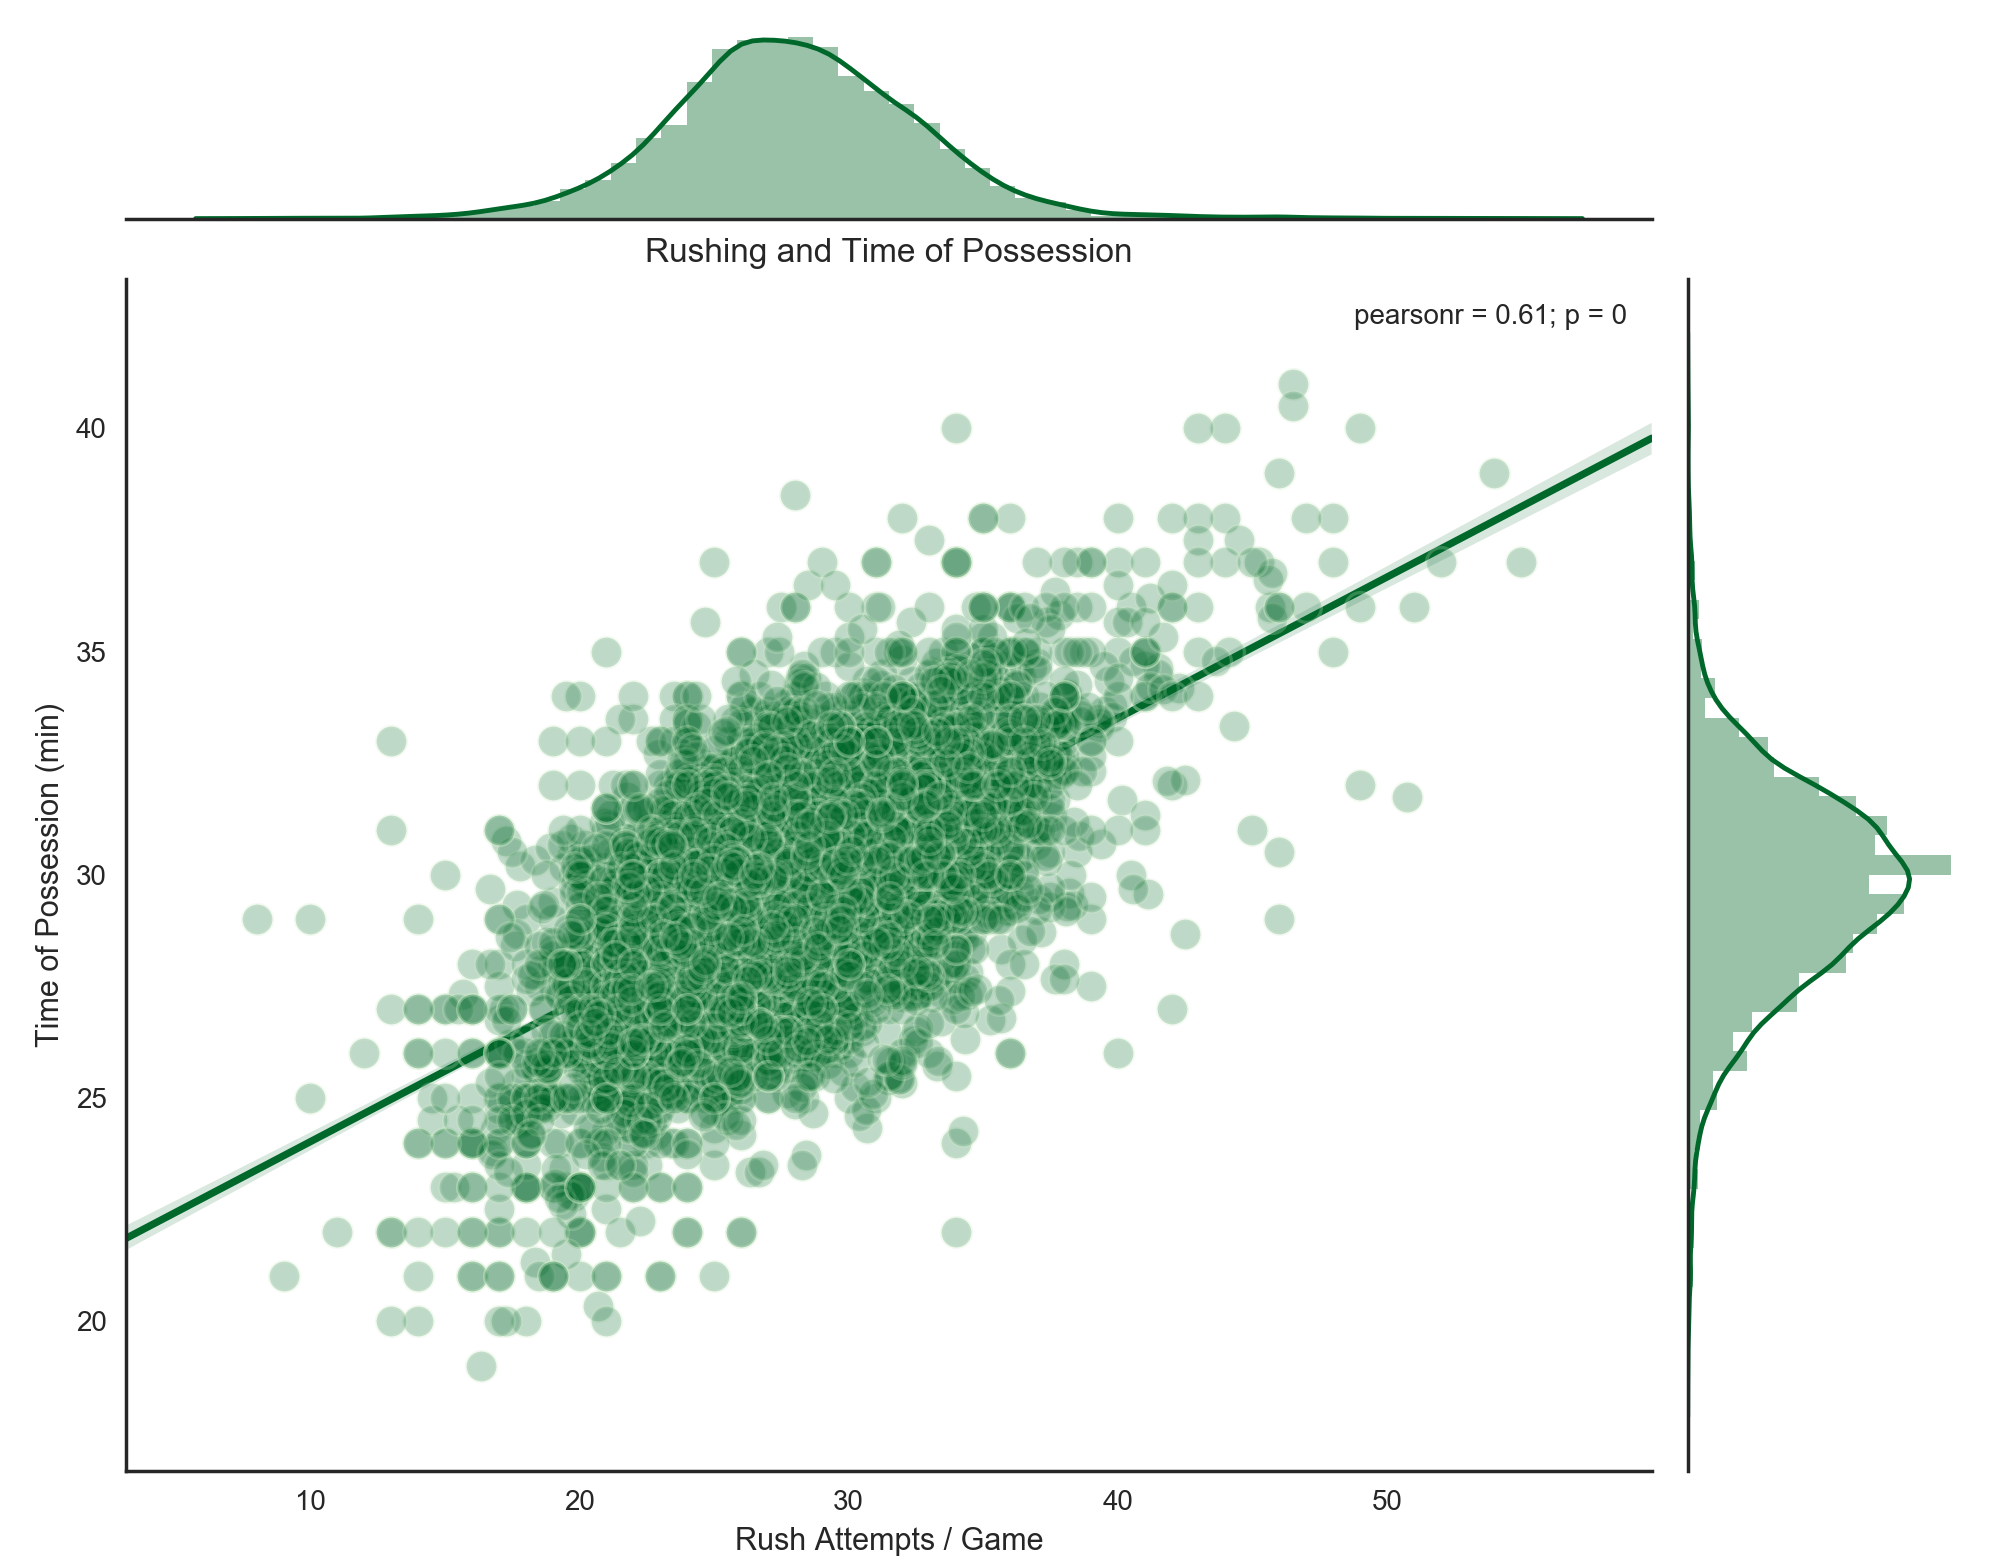 Time of Possession Correlation to Rush Attempts